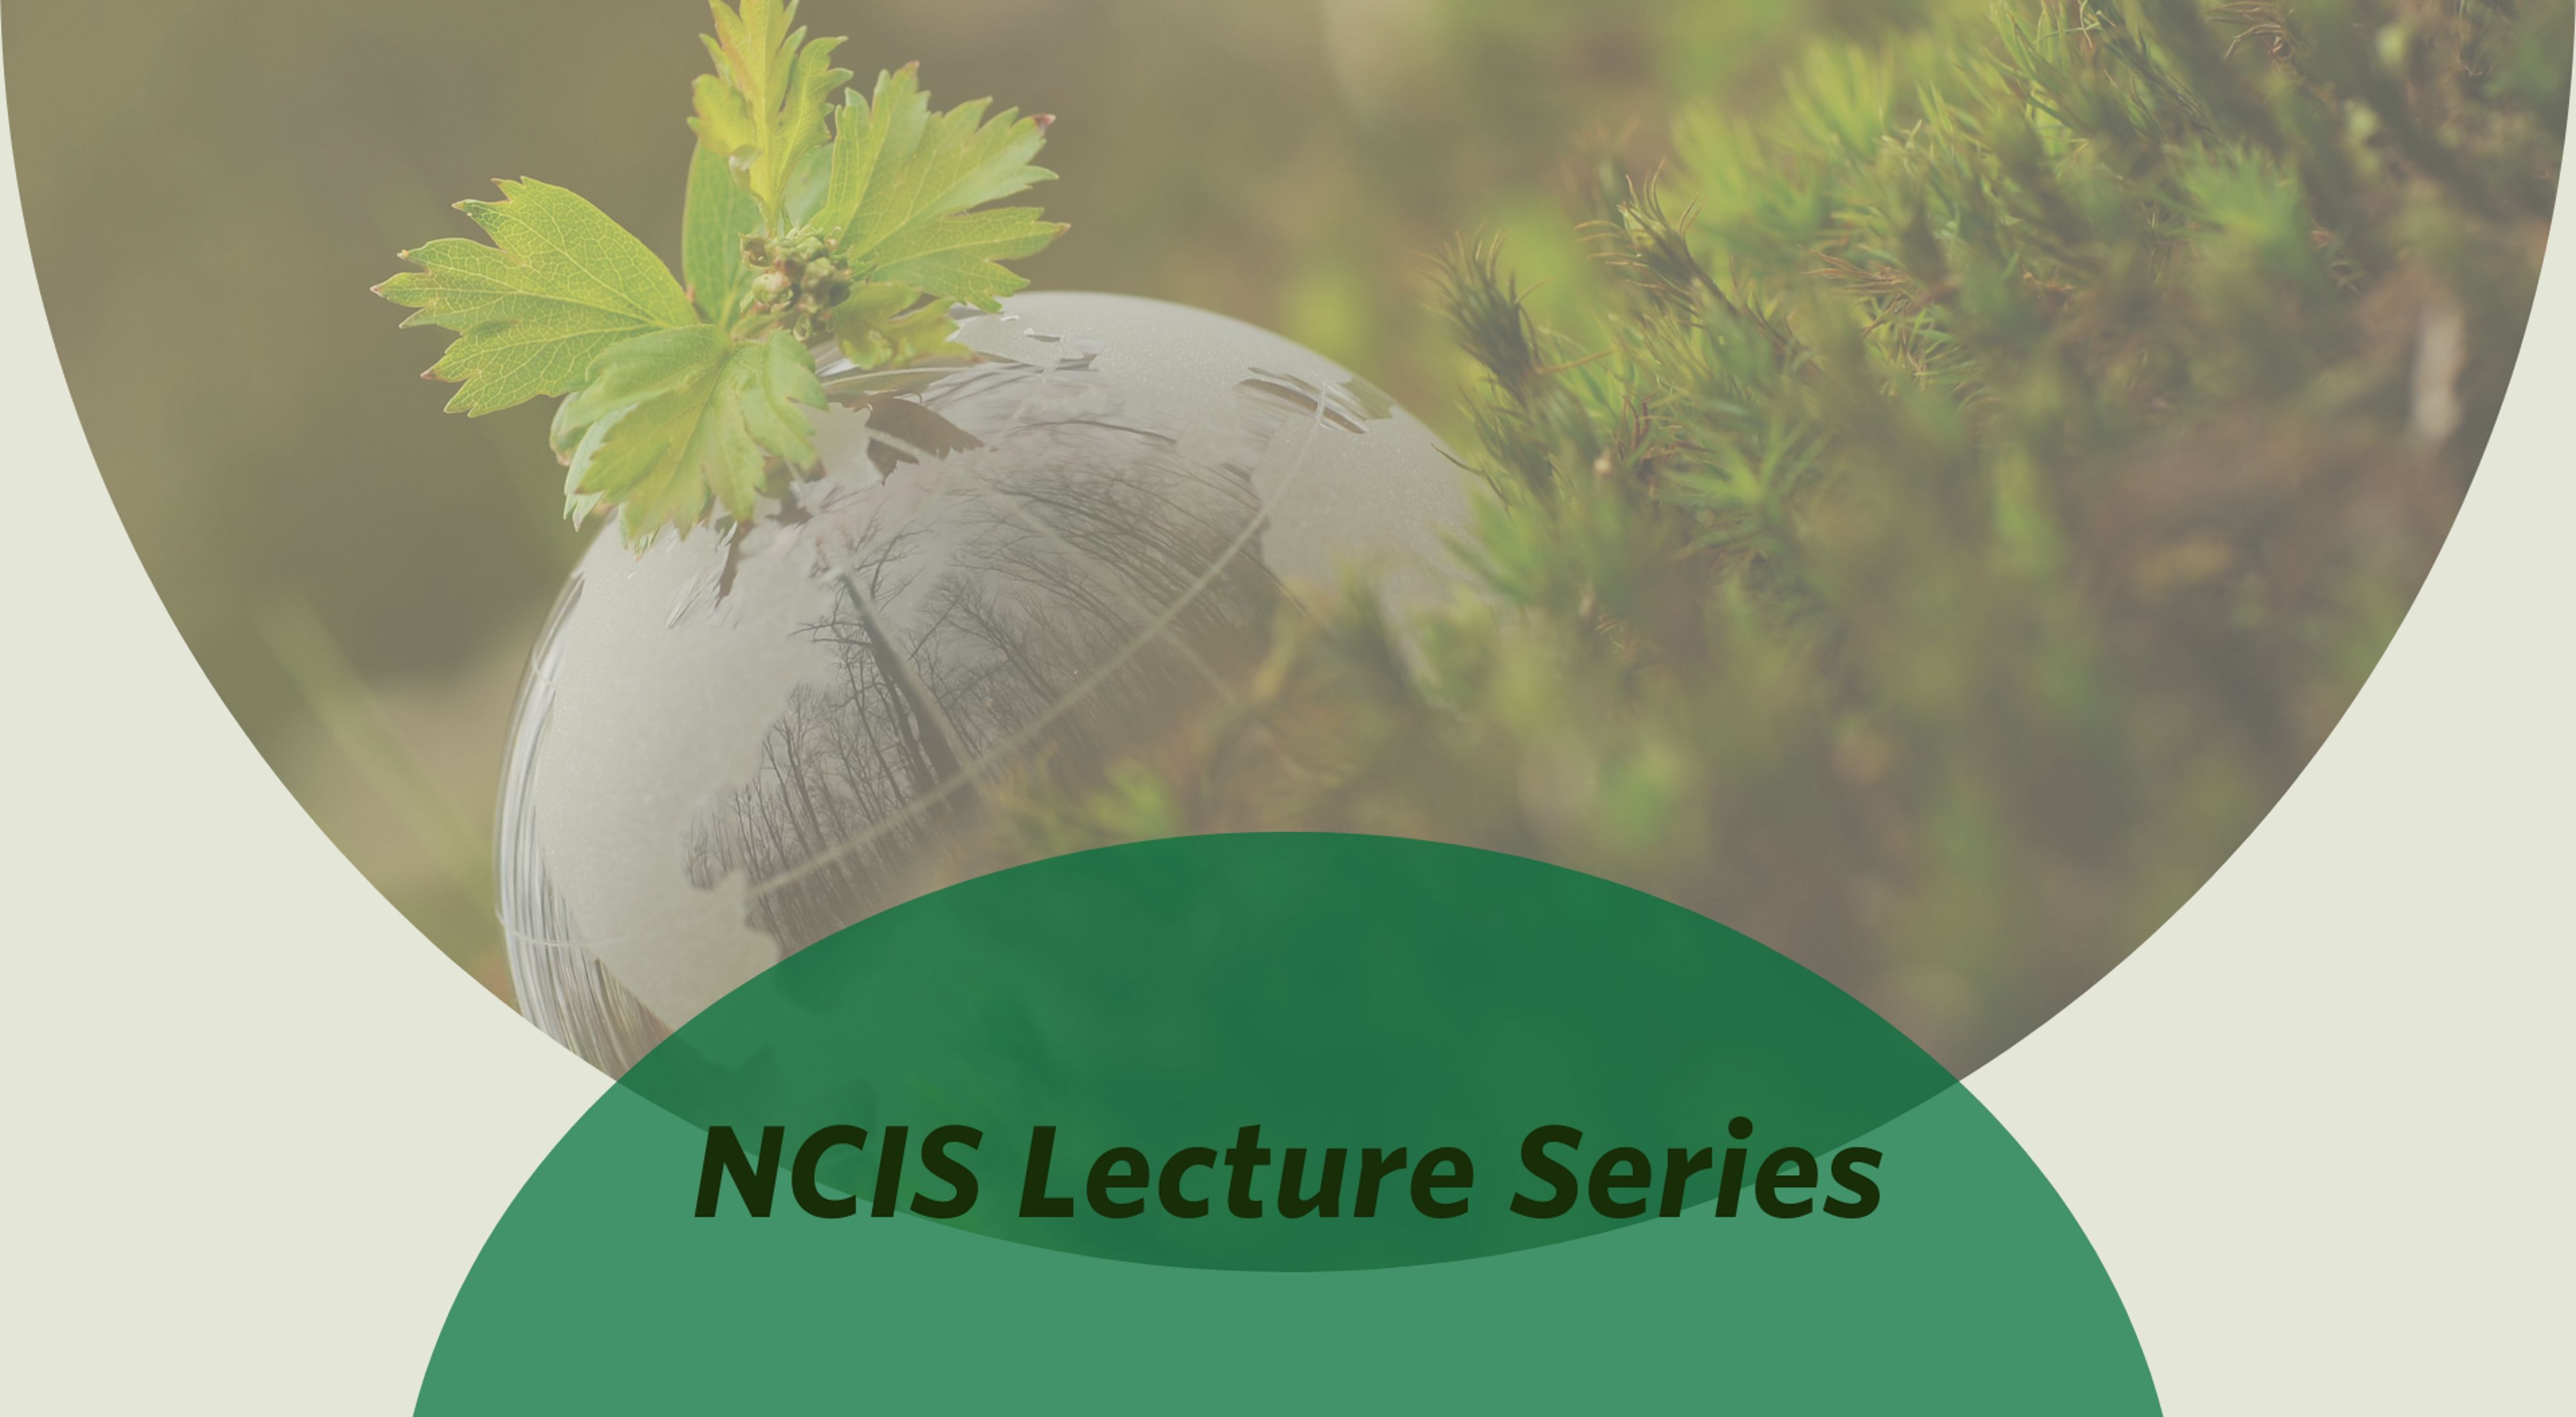 NCIS Lecture Series